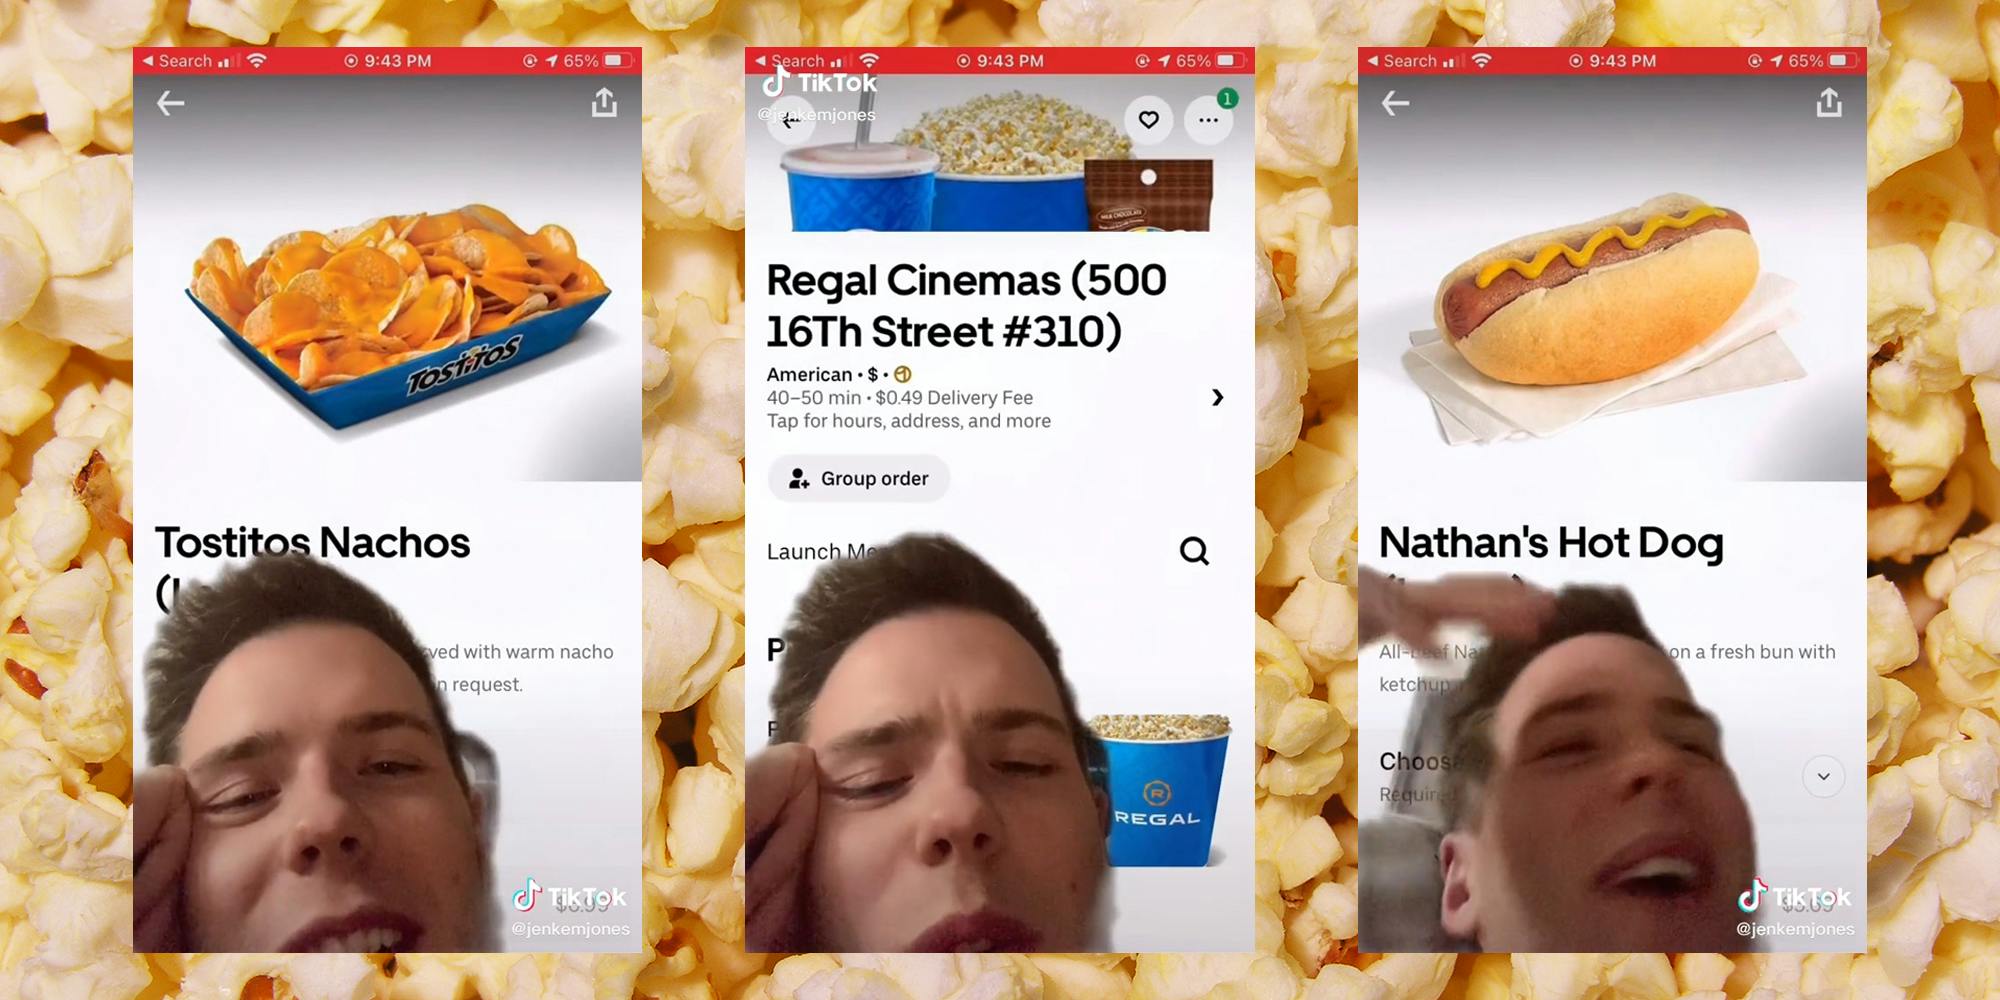 young man in front of tostitos nachos, nathan's hot dog, and regal cinemas uber eats landing pages